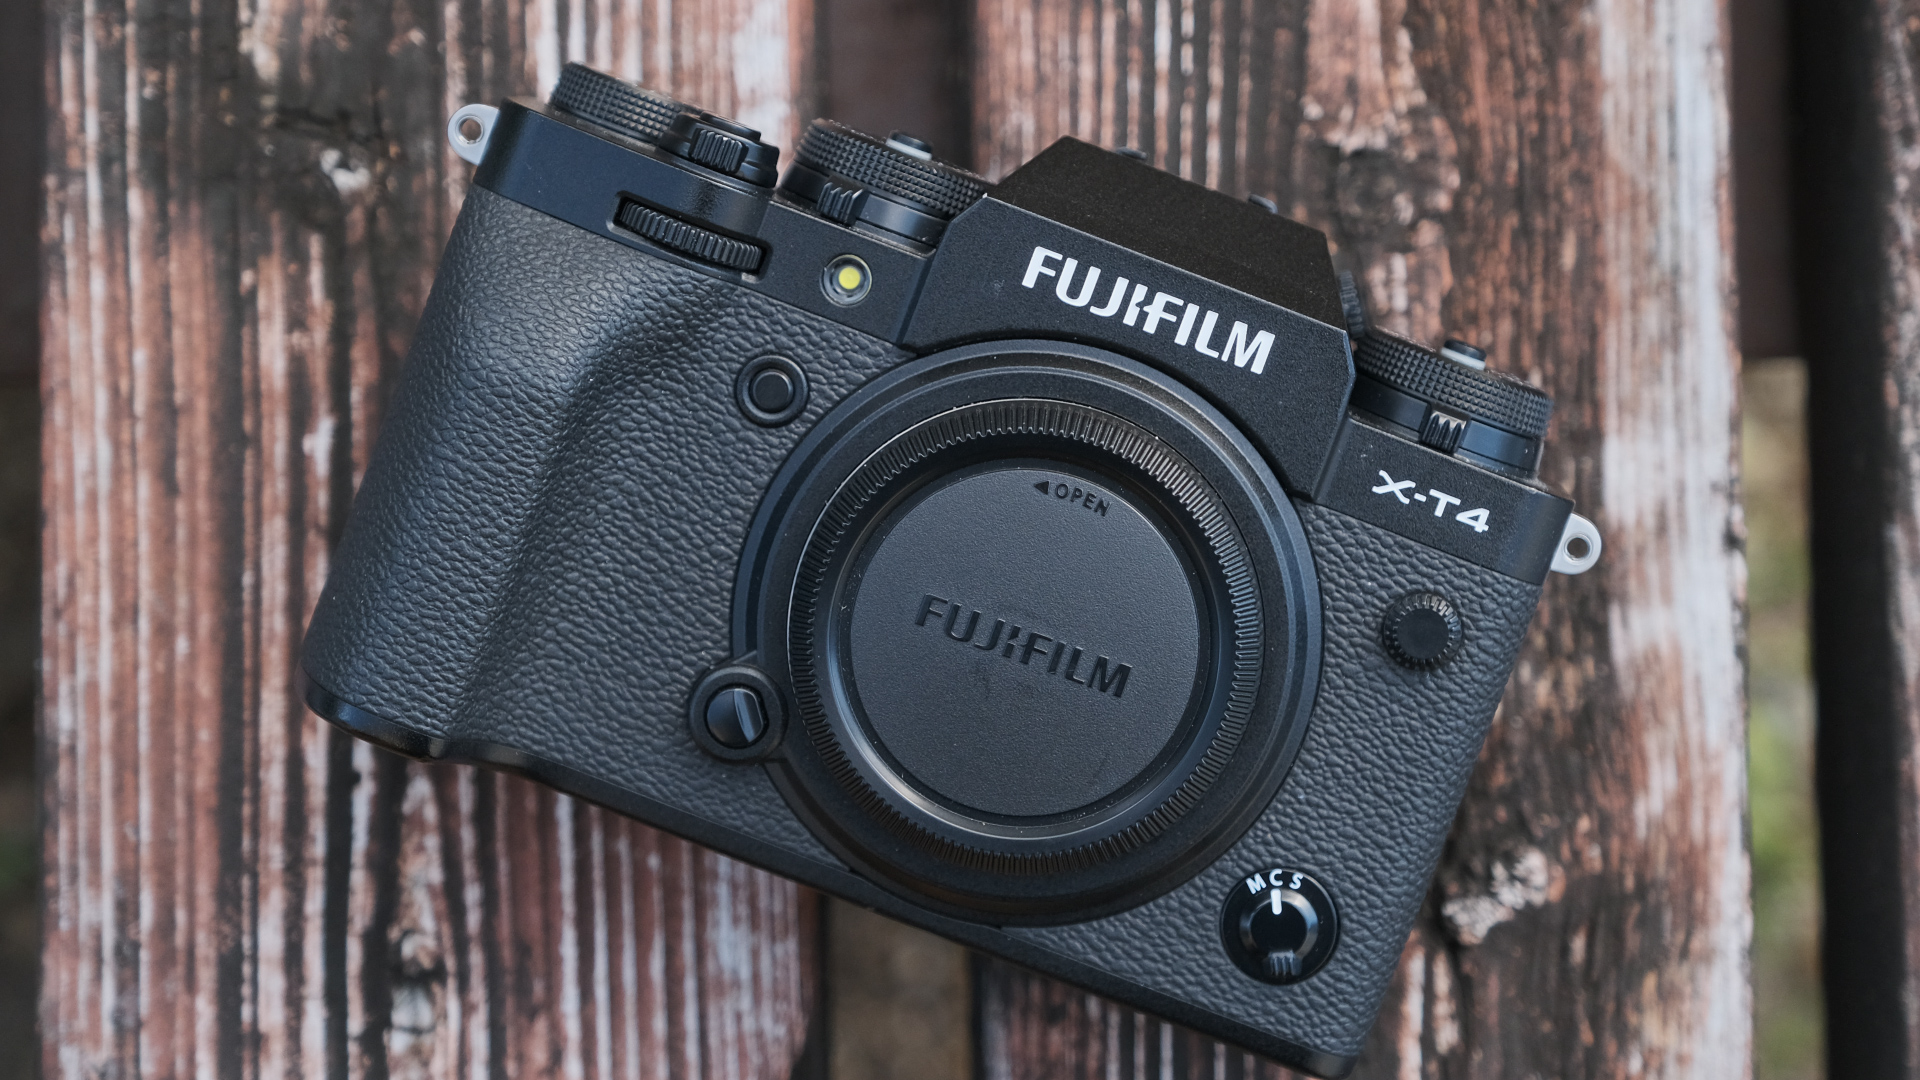 FUJIFILM XT4 Handson Review The Good Has Just Much Better